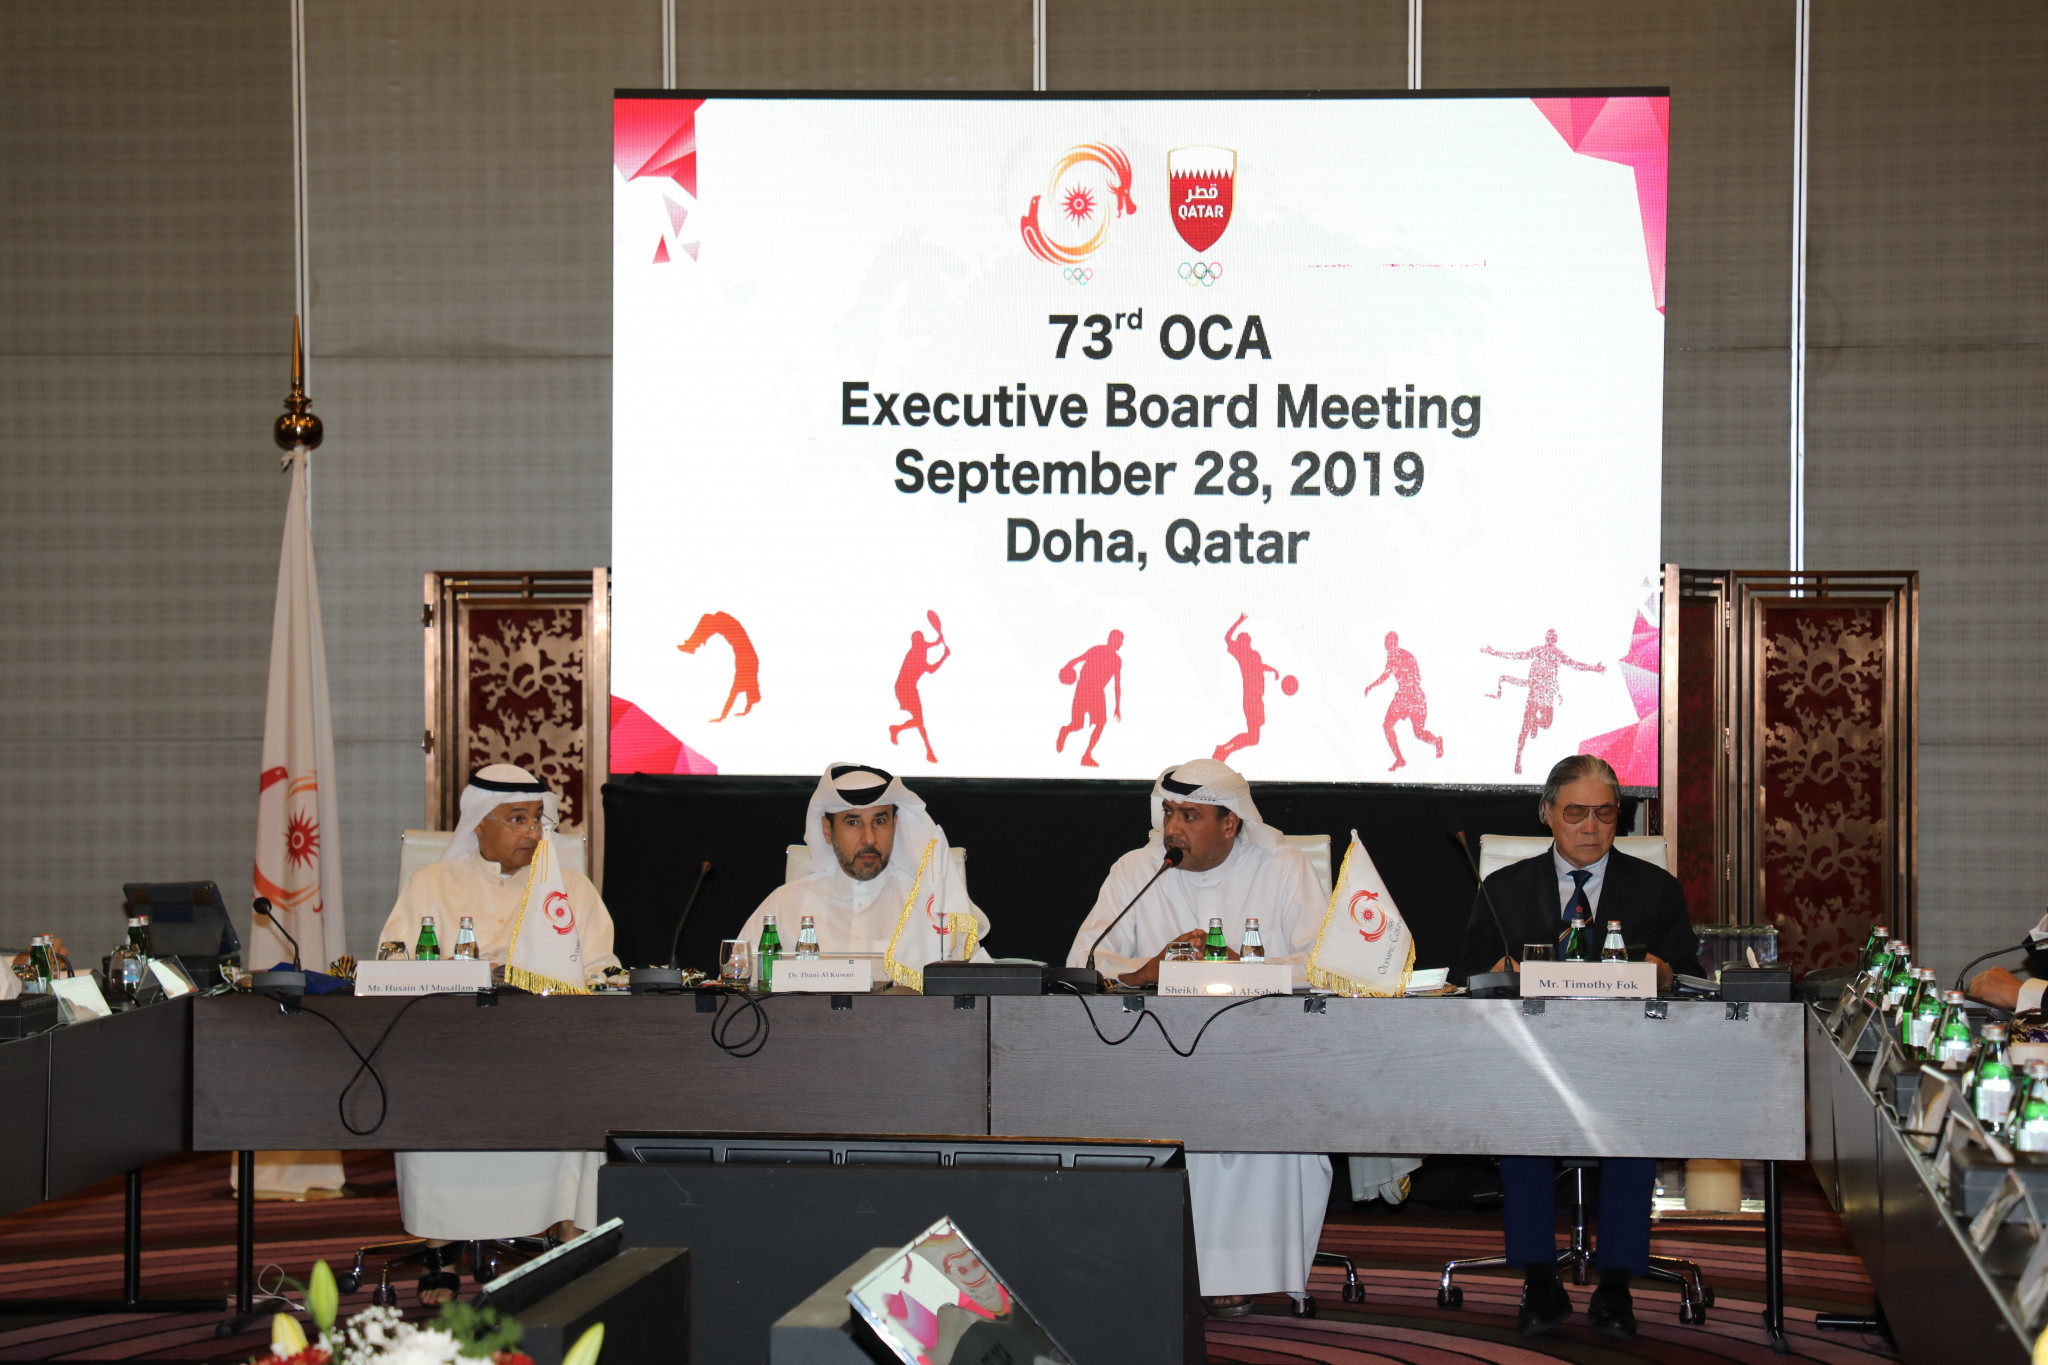 Tashkent were awarded the 2025 Asian Youth Games during the OCA's Executive Board meeting in Doha ©OCA